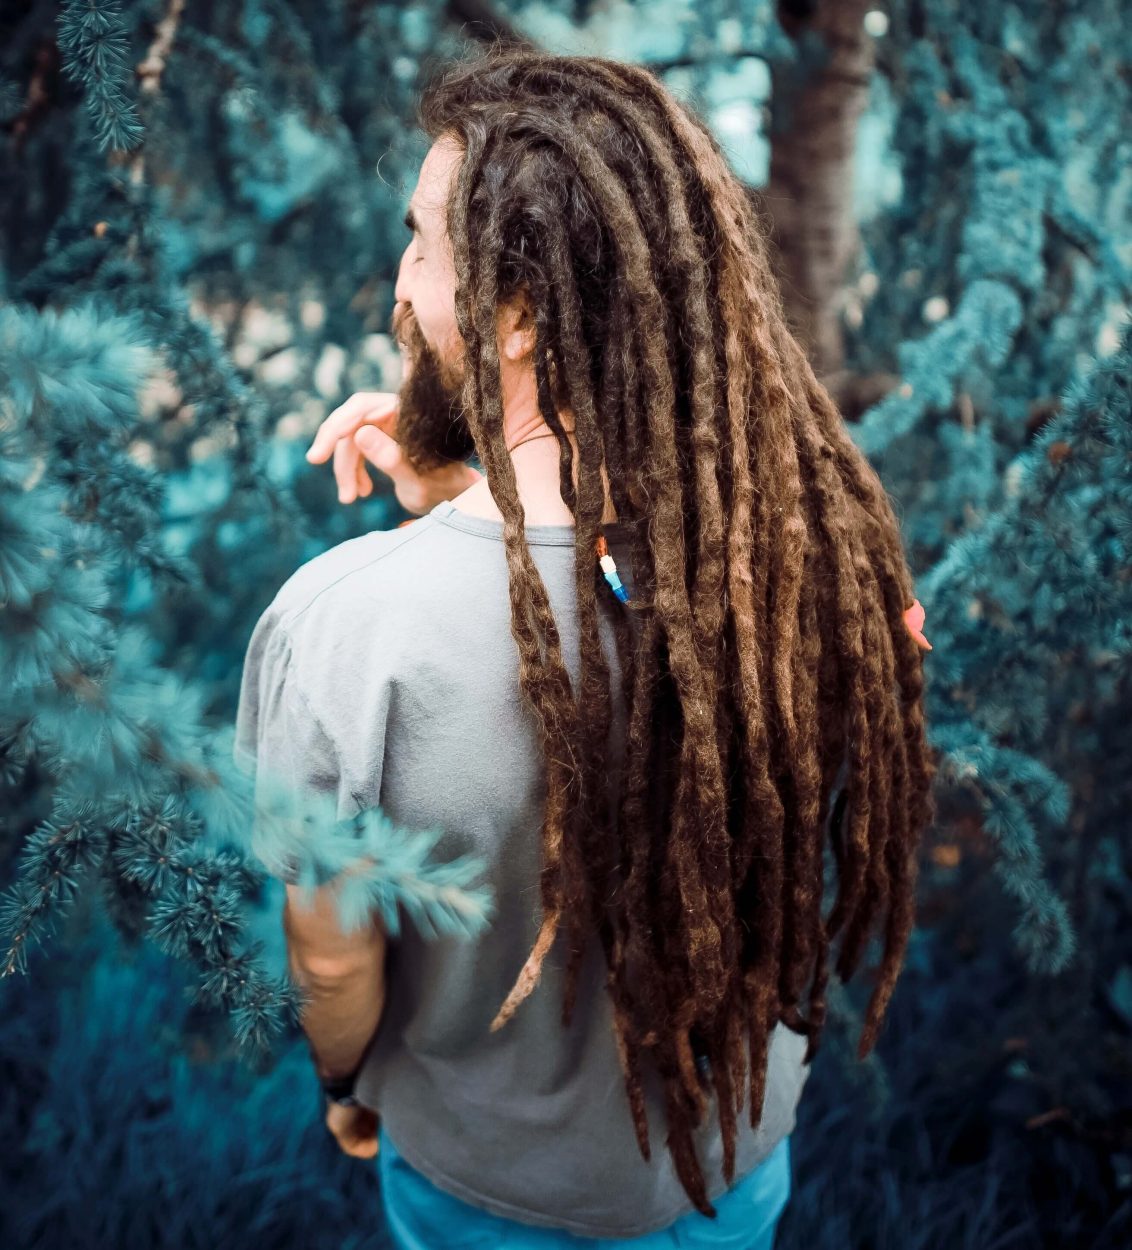 Image of a guy with dreads